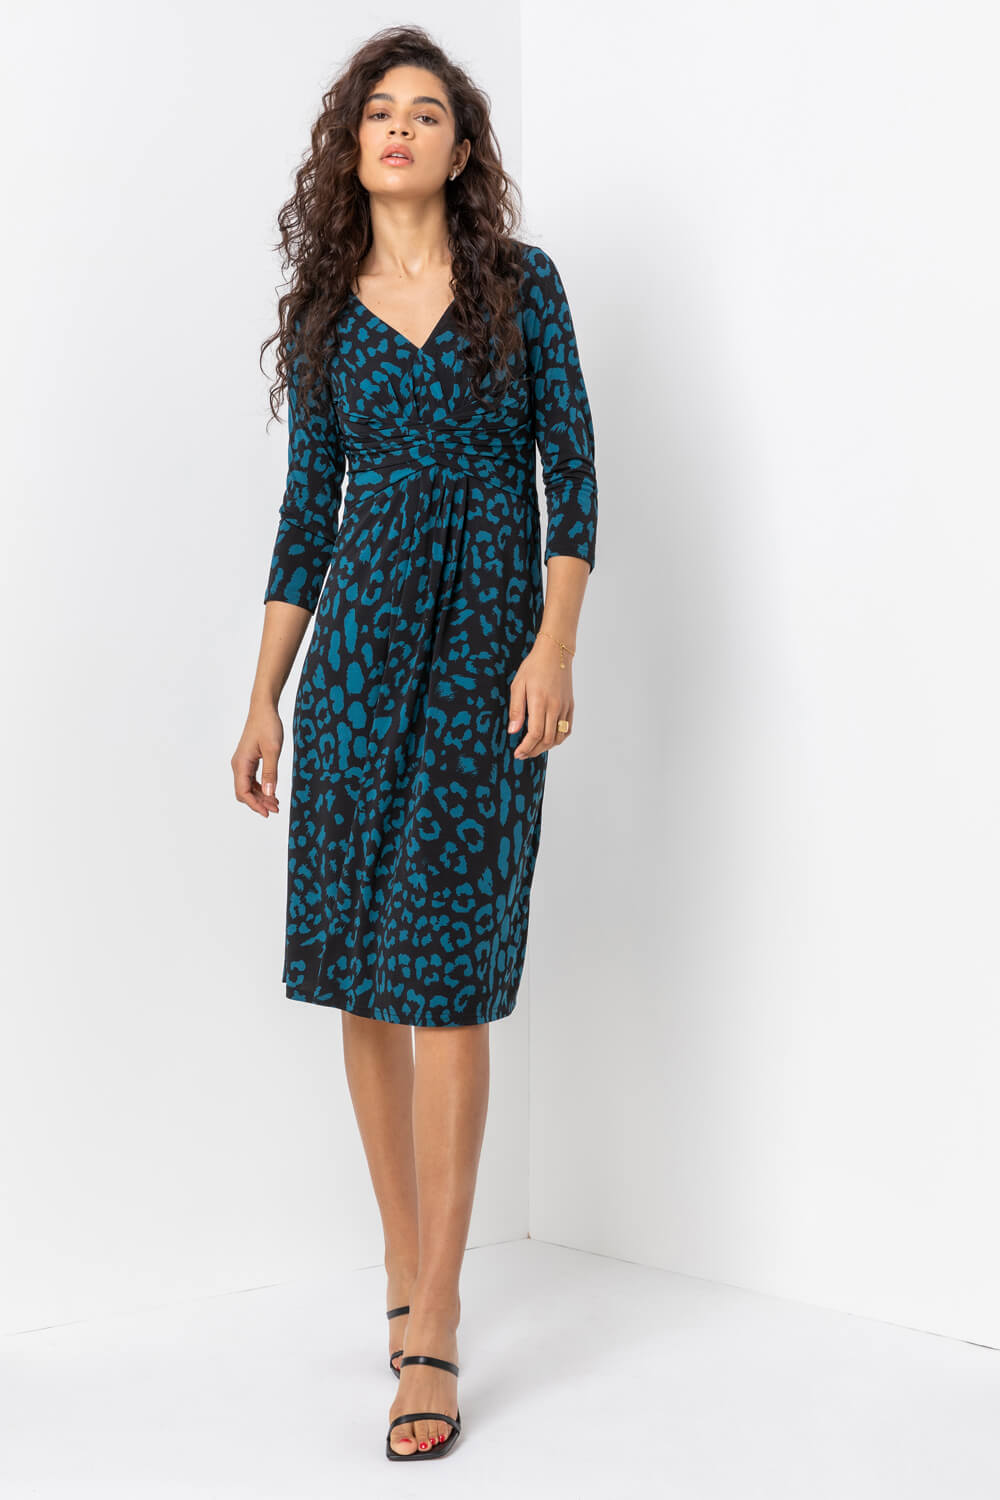 Teal Animal Print Fit And Flare Dress, Image 3 of 4